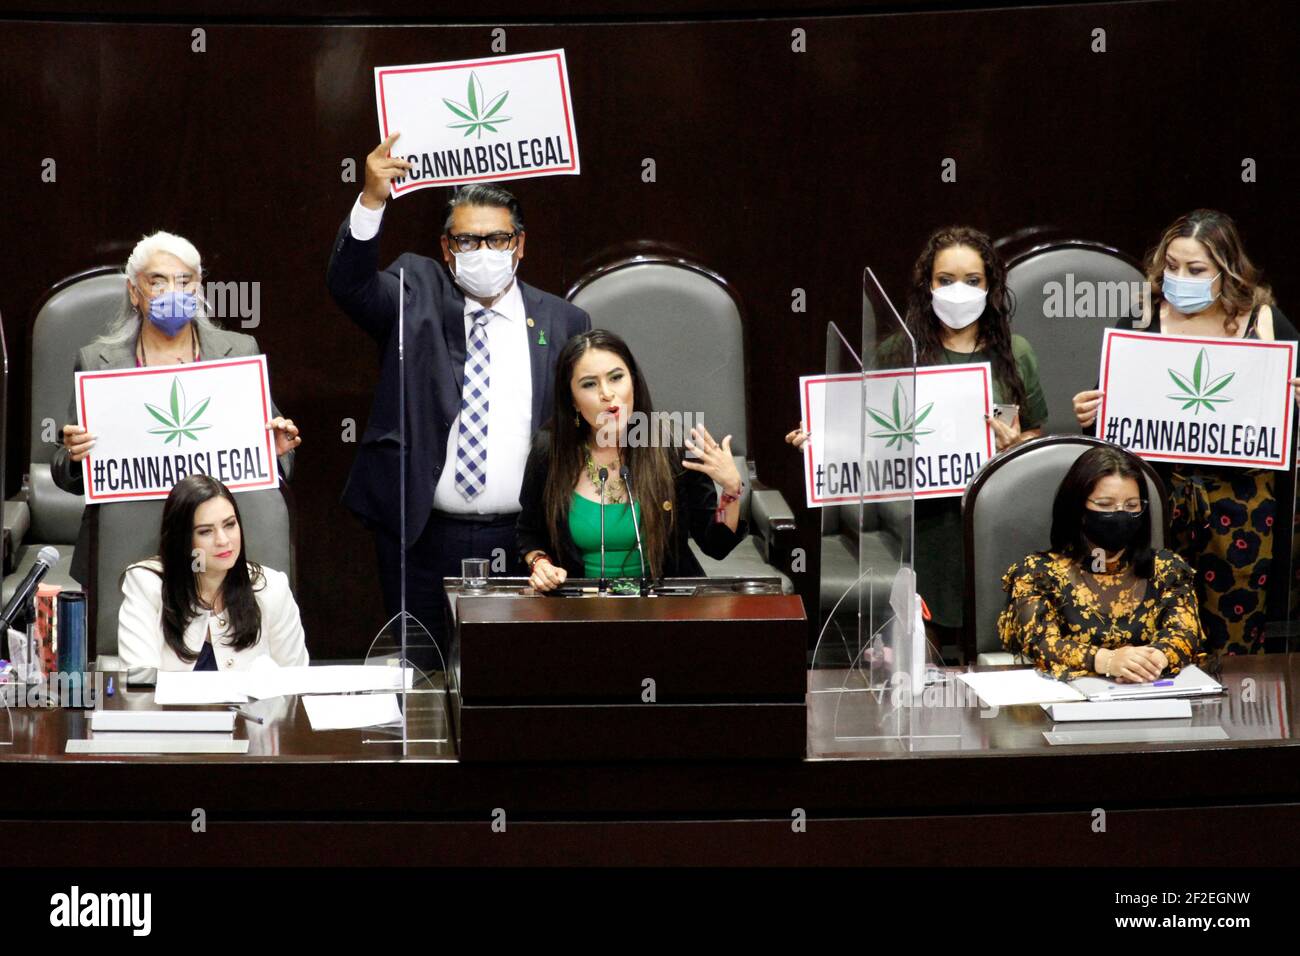 Mexico City, Mexico. 10th Mar, 2021. The legislator of the National Regeneration Movement Political Party in the Chamber of Deputies of Mexico, Simey Olvera, urged his fellow legislators to approve the regulation of marijuana and at the end of the discussion the decriminalization and regulation of the recreational use of marijuana was approved. Mexico City, Mexico, March 10, 2021. Photo by Luis Barron/Eyepix/ABACAPRESS.COM Credit: Abaca Press/Alamy Live News Stock Photo